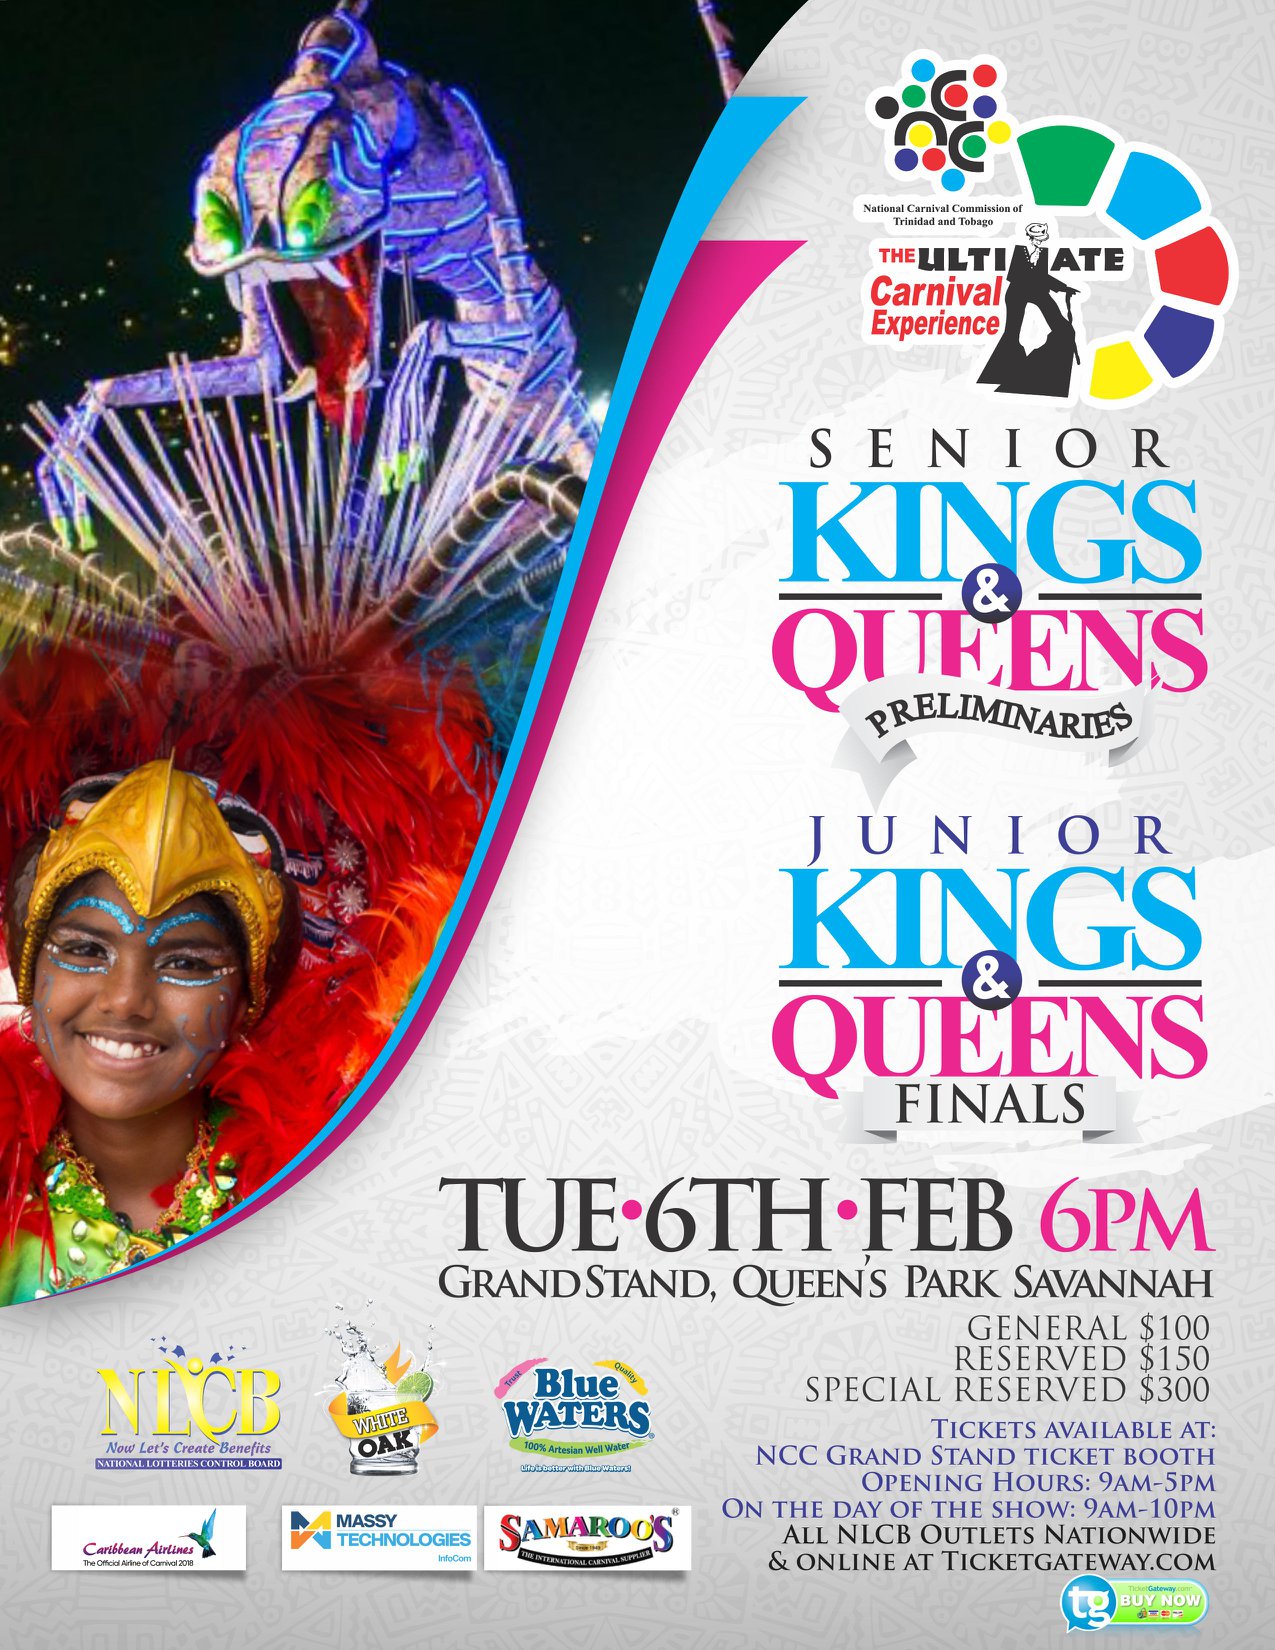 Kings and Queens Finals Juniors and Seniors Preliminaries My Trini Lime